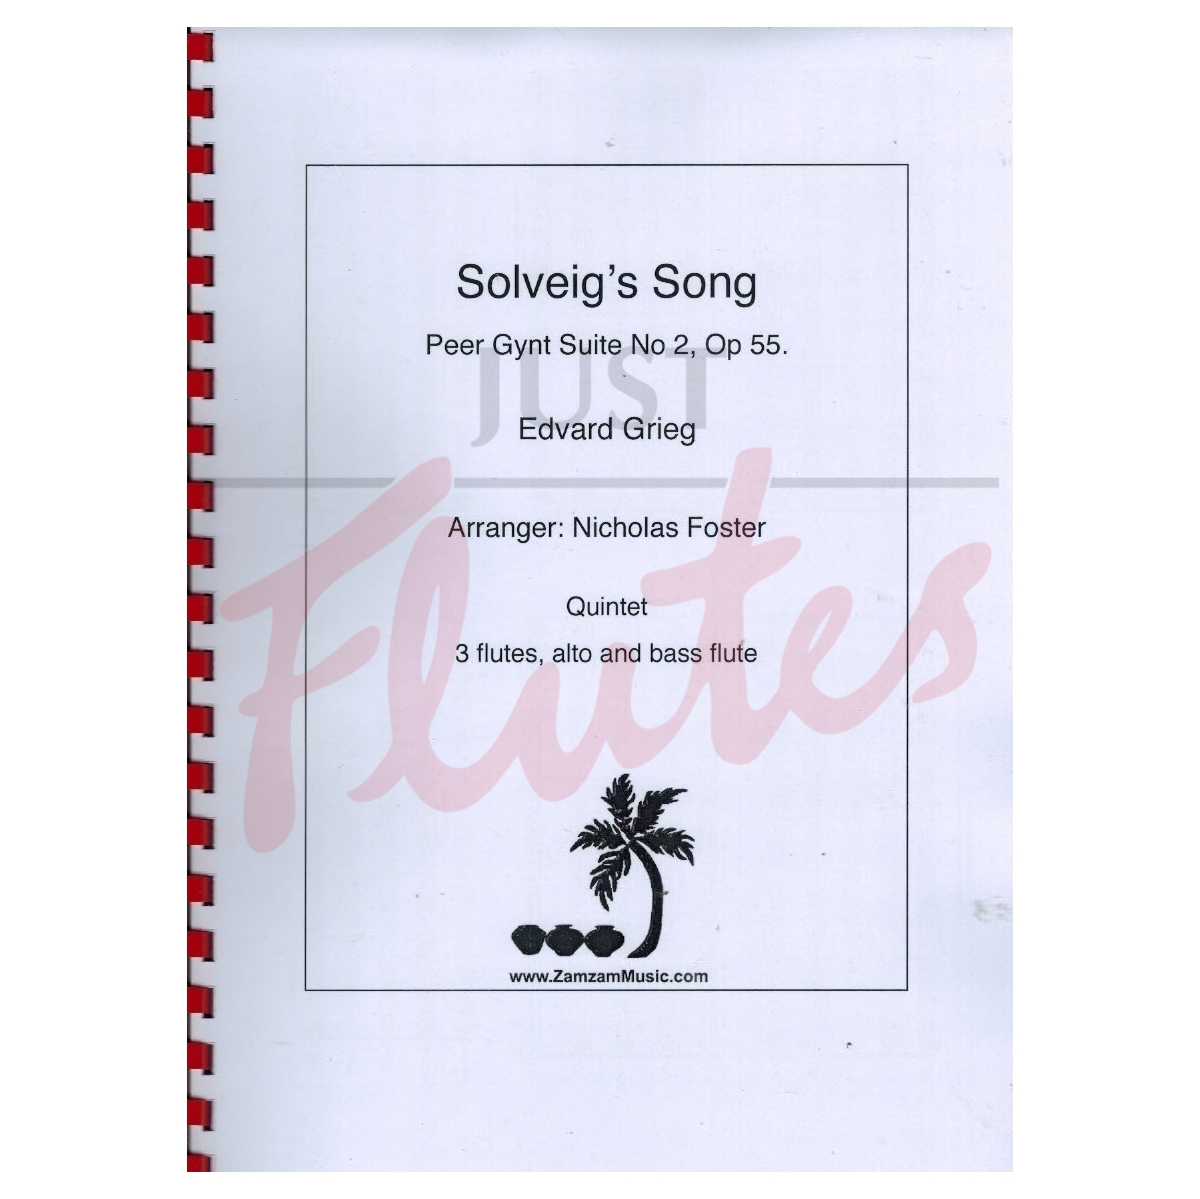 Peer Gynt Suite No 2: Solveig's Song